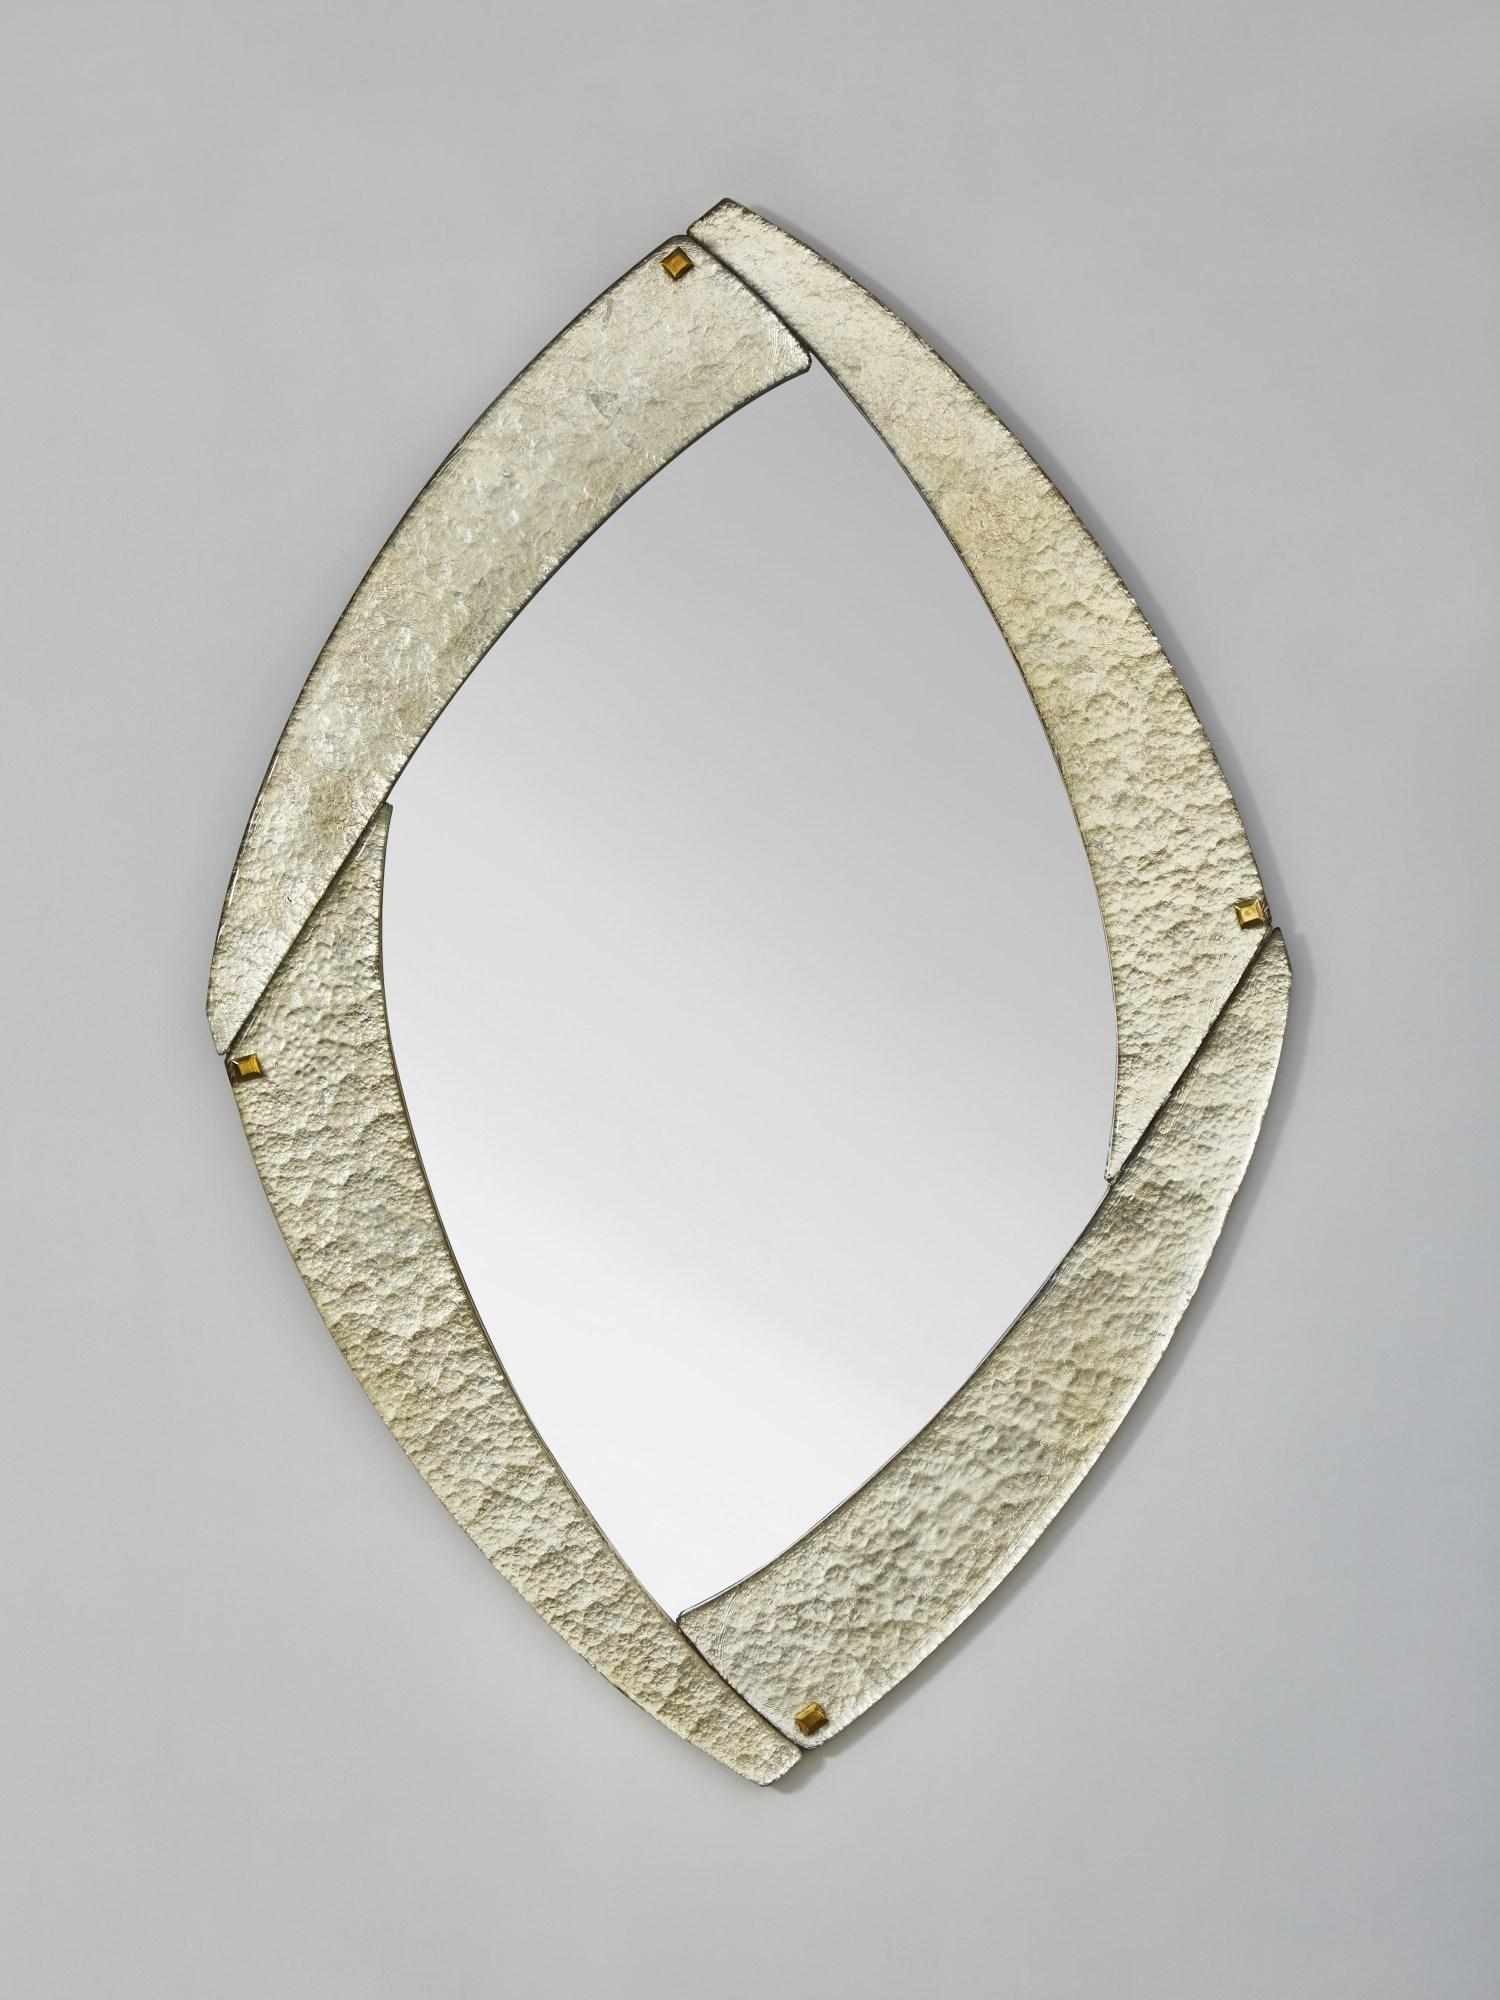 Oval mirror with frame in Murano glass gilt with white gold leaf frame.Creation by Studio Glustin.